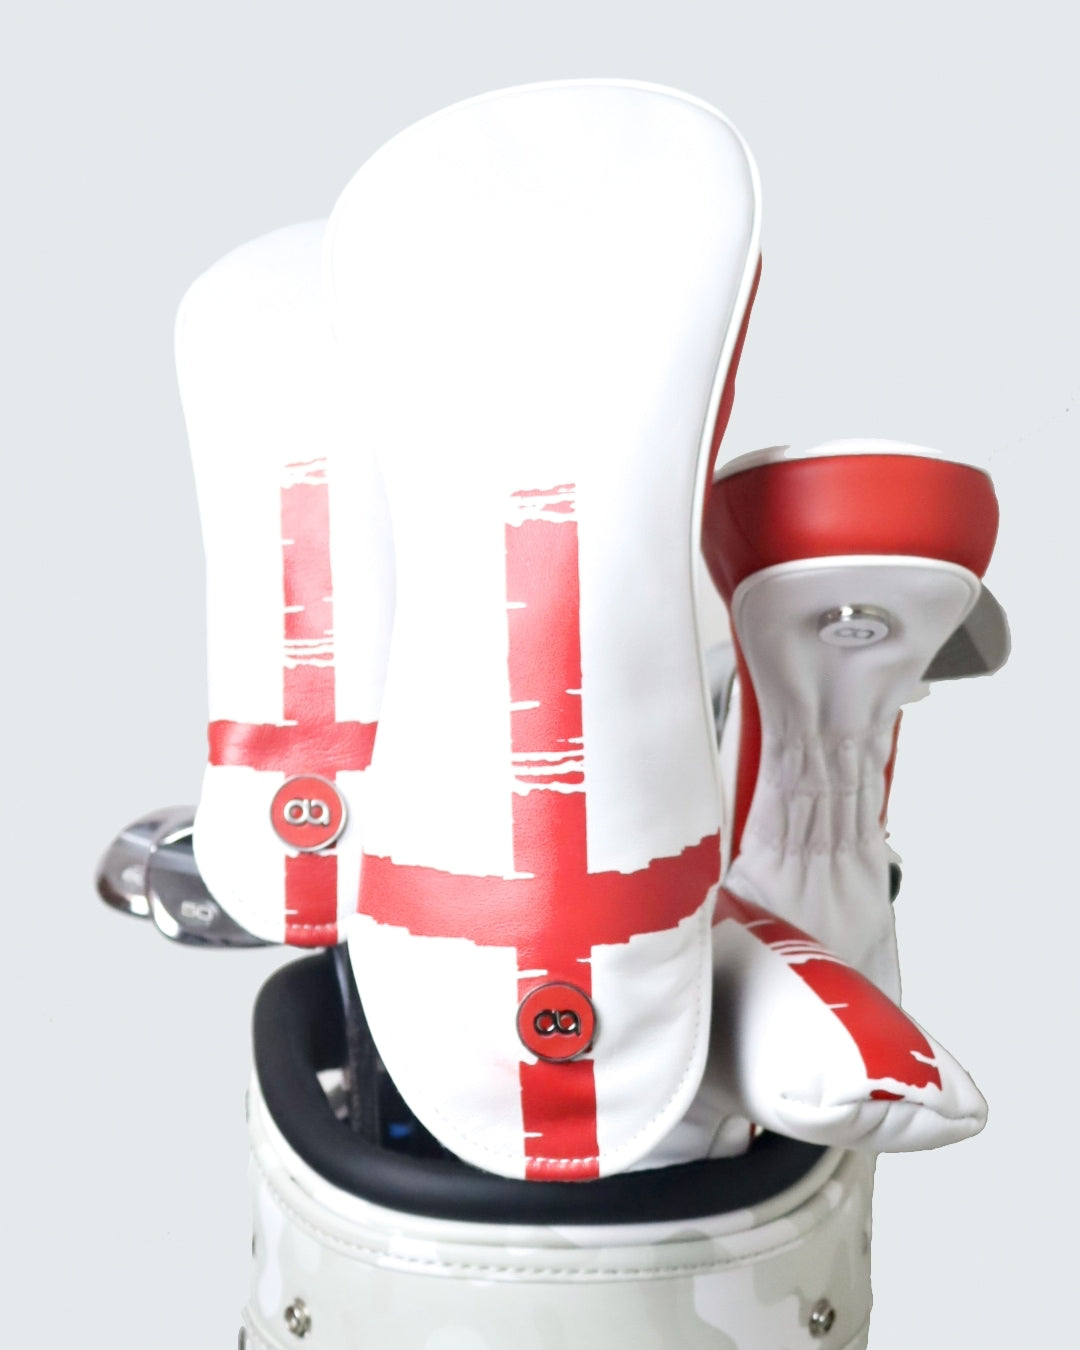 Set of England white and red leather headcovers by David Alexander